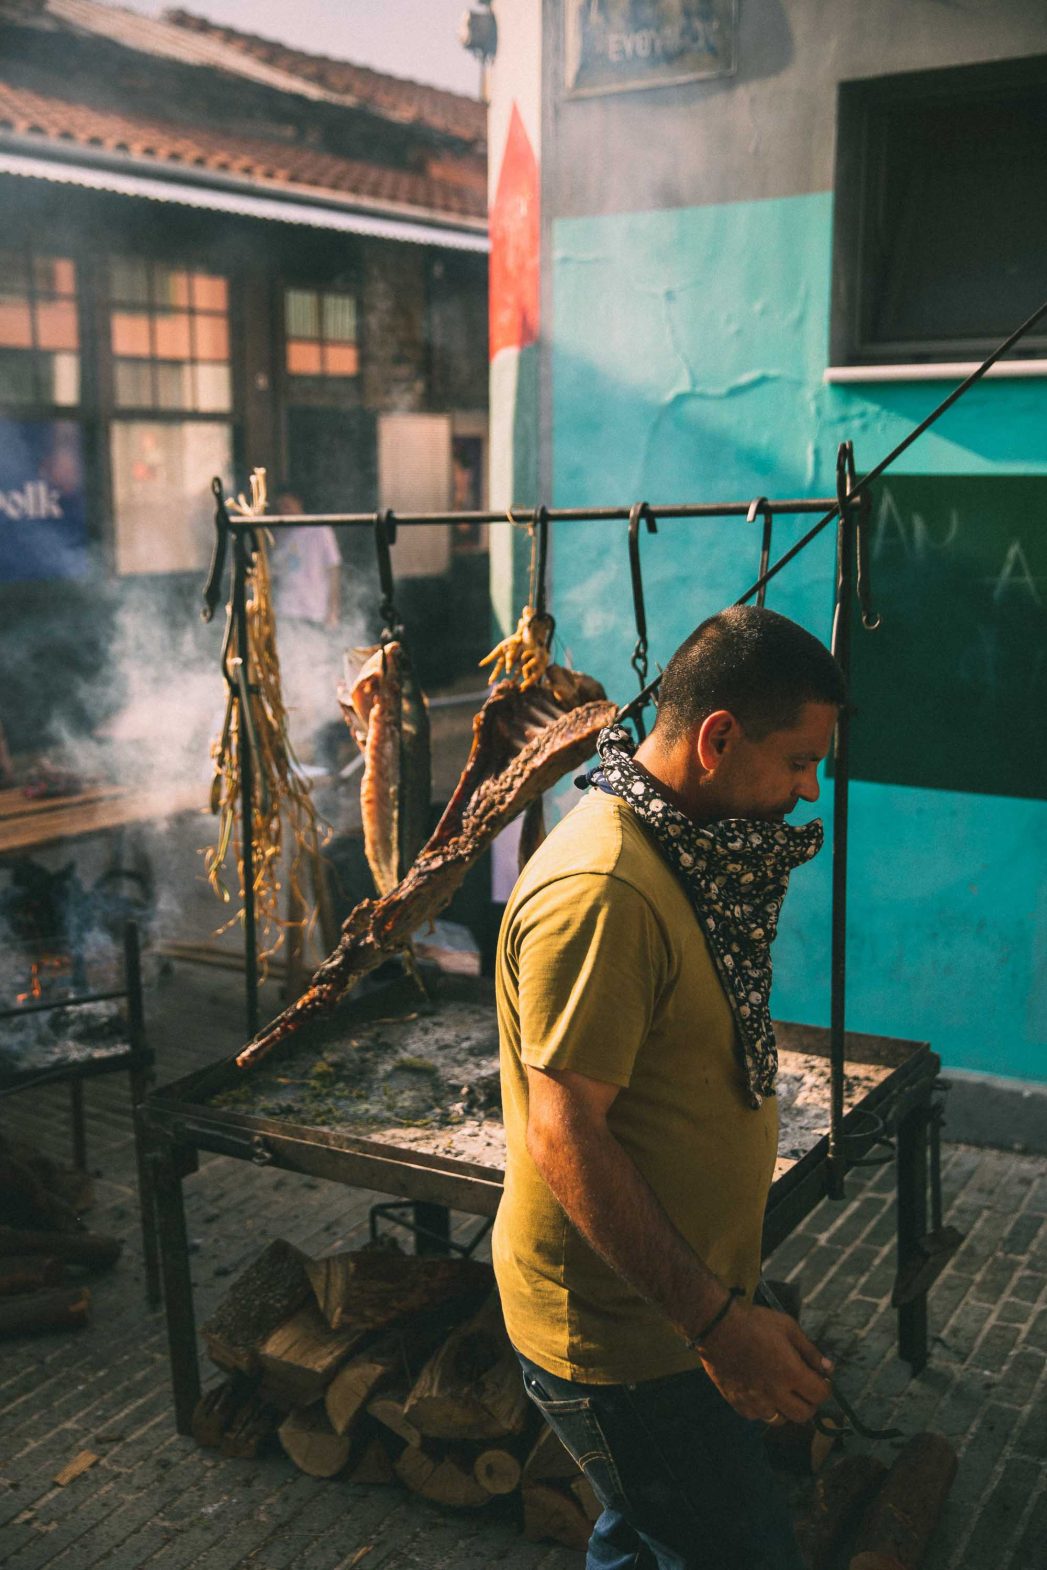 A man walks past some meat that is roasting outdoors.